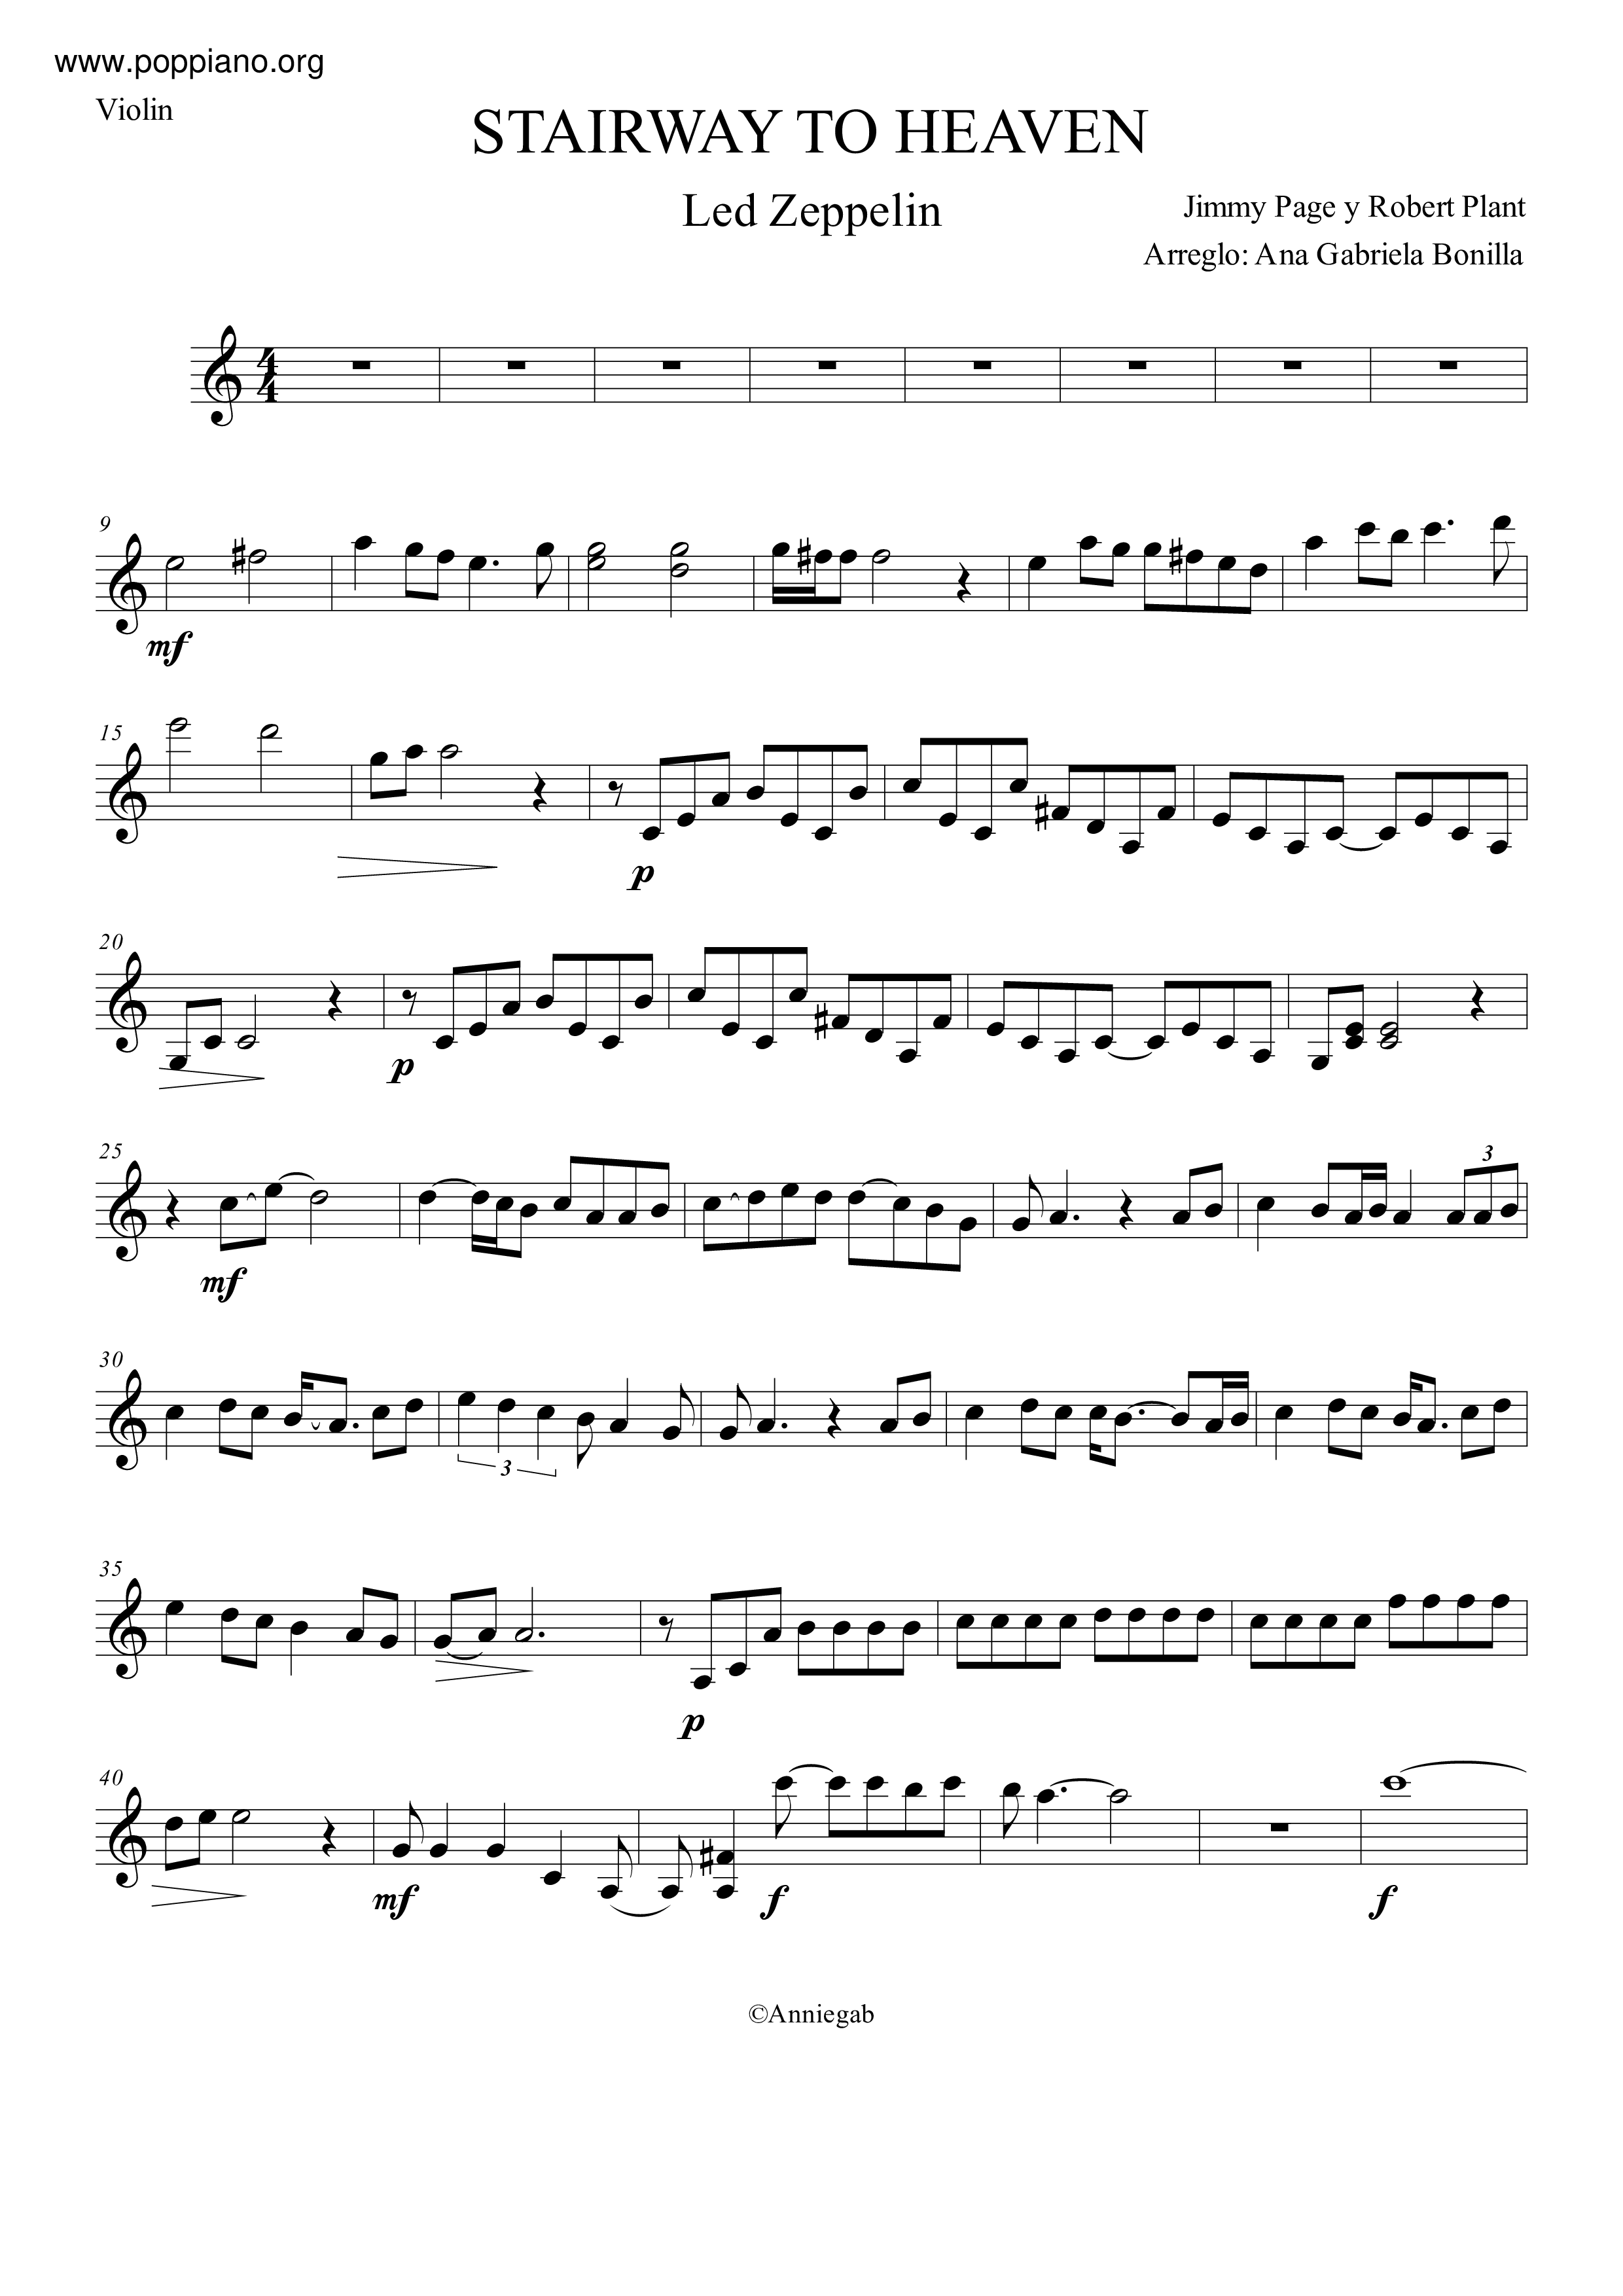 Begivenhed Nysgerrighed Awaken ☆ Led Zeppelin-Stairway To Heaven Violin Score pdf, - Free Score Download ☆